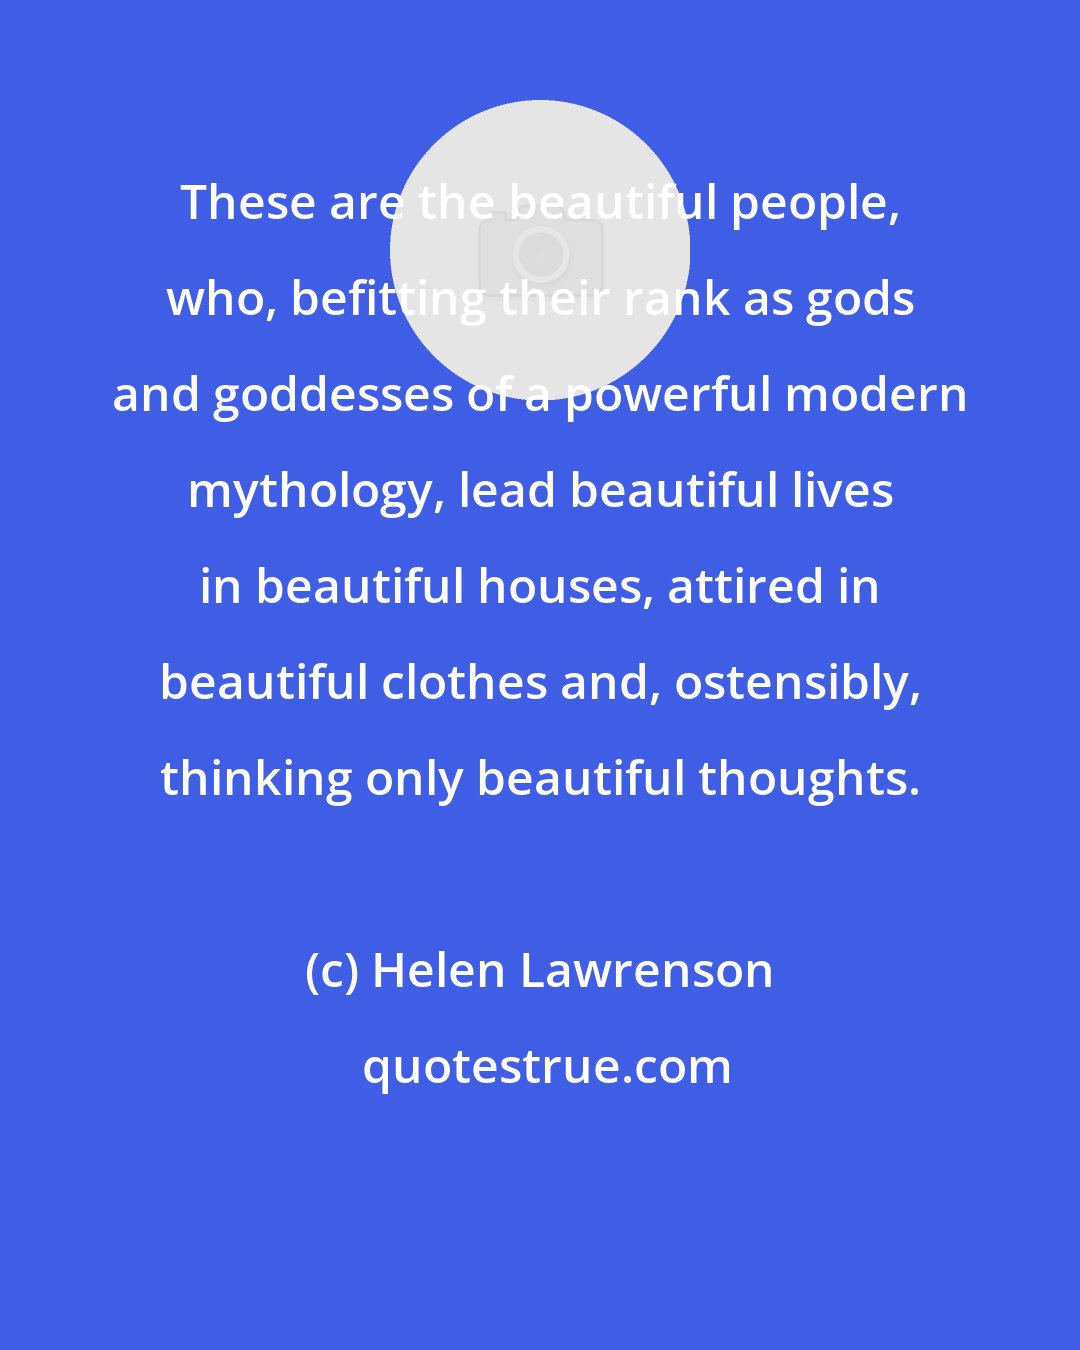 Helen Lawrenson: These are the beautiful people, who, befitting their rank as gods and goddesses of a powerful modern mythology, lead beautiful lives in beautiful houses, attired in beautiful clothes and, ostensibly, thinking only beautiful thoughts.